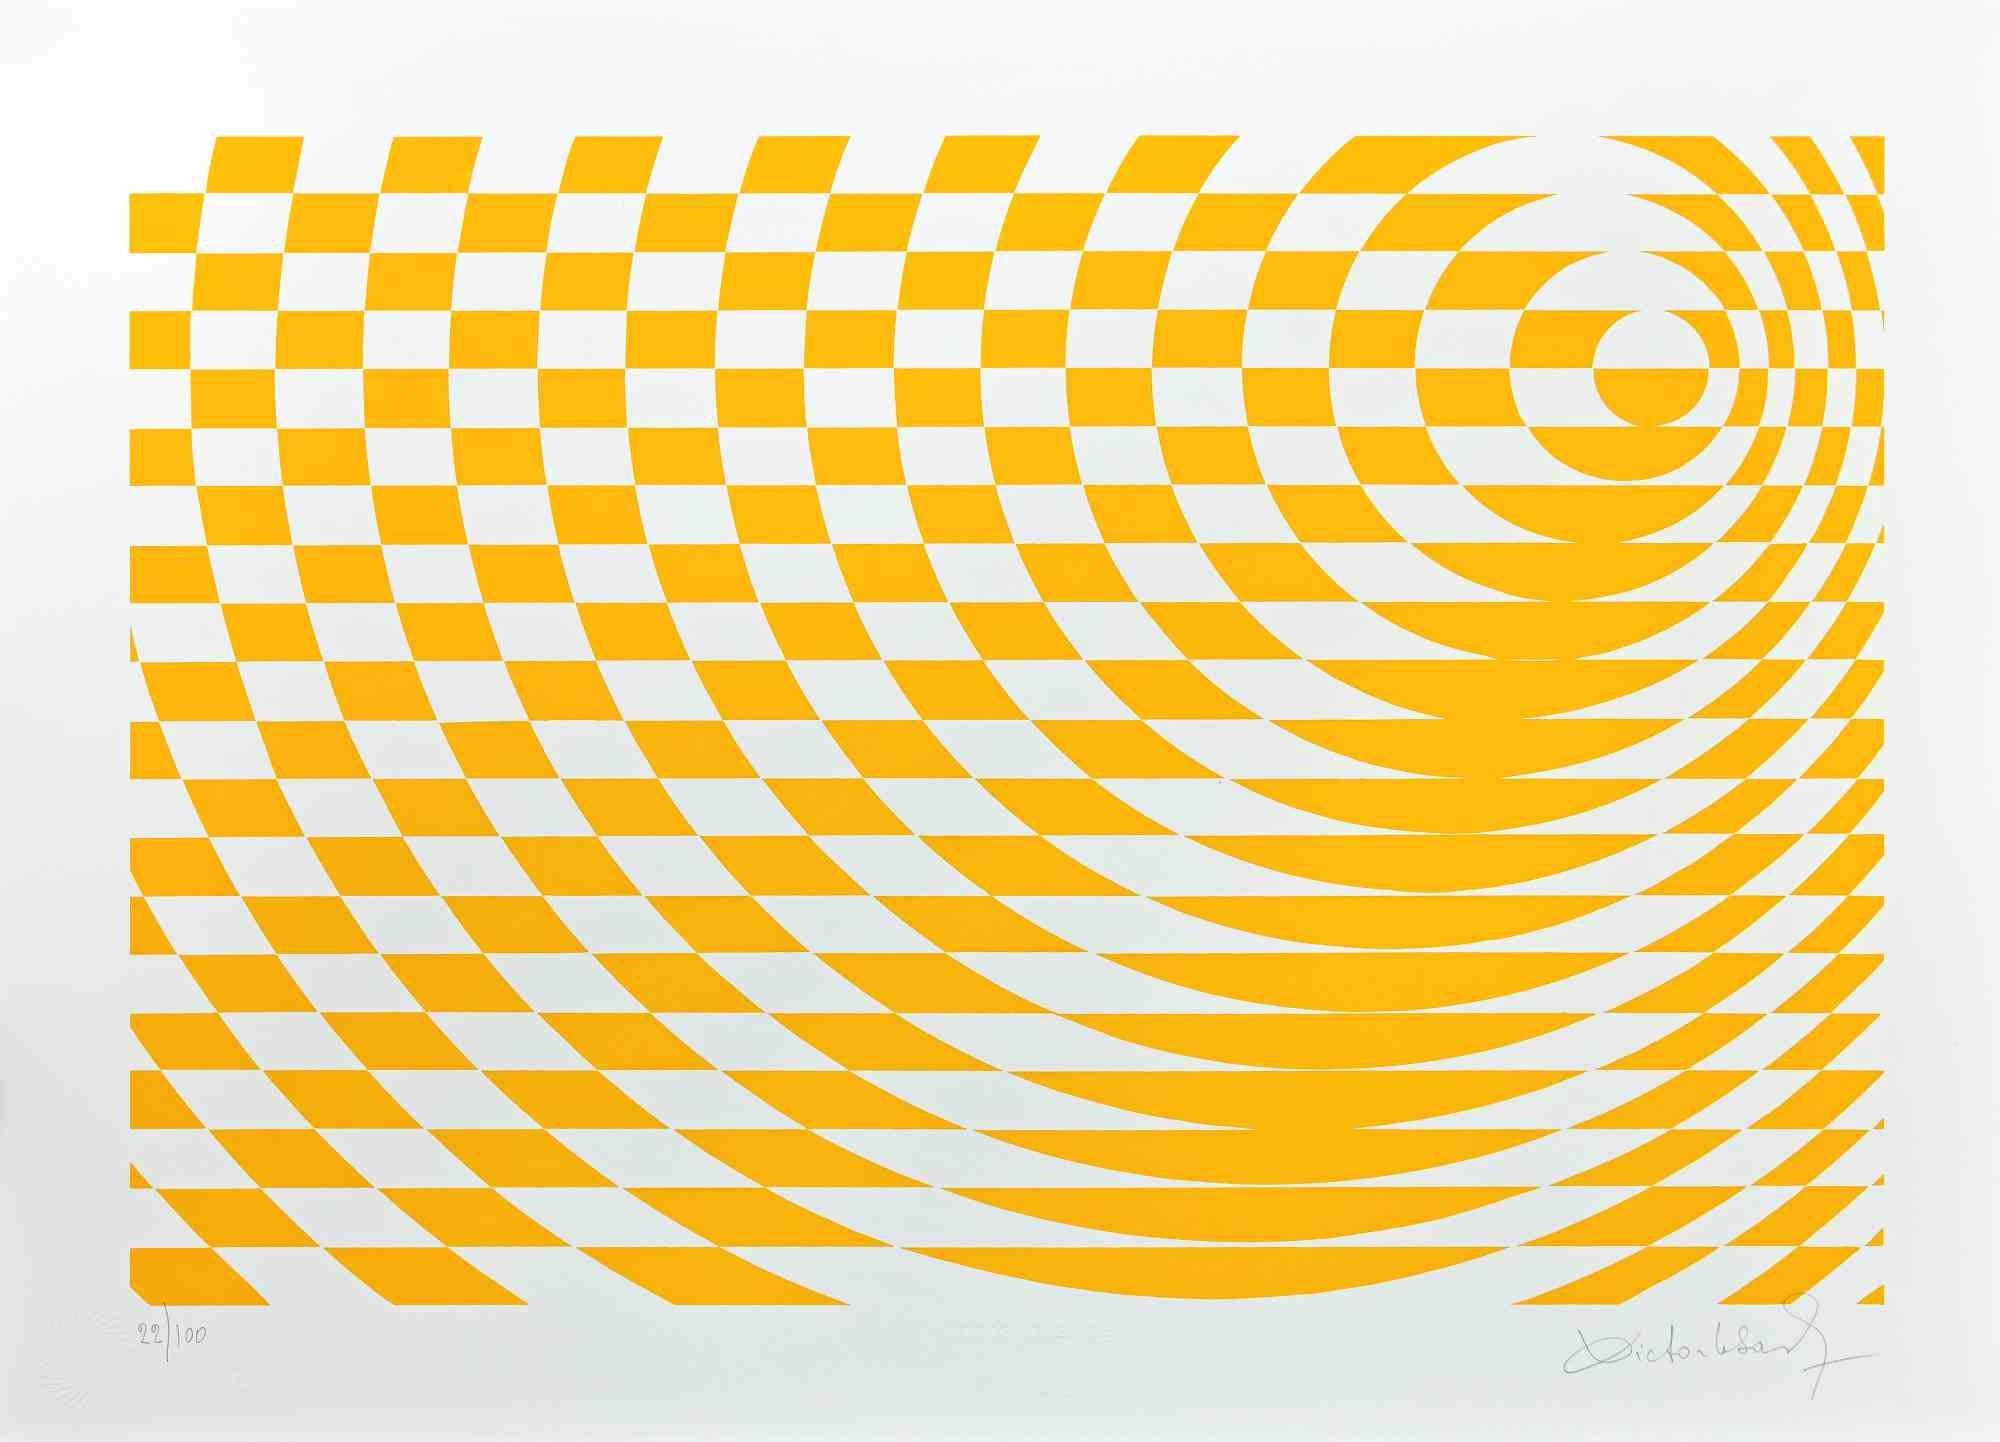 yellow composition is a Screen Print on Paper realized by Victor Debach in 1970s.

Hand signed and numbered. Edition of 100 prints.

Good condition